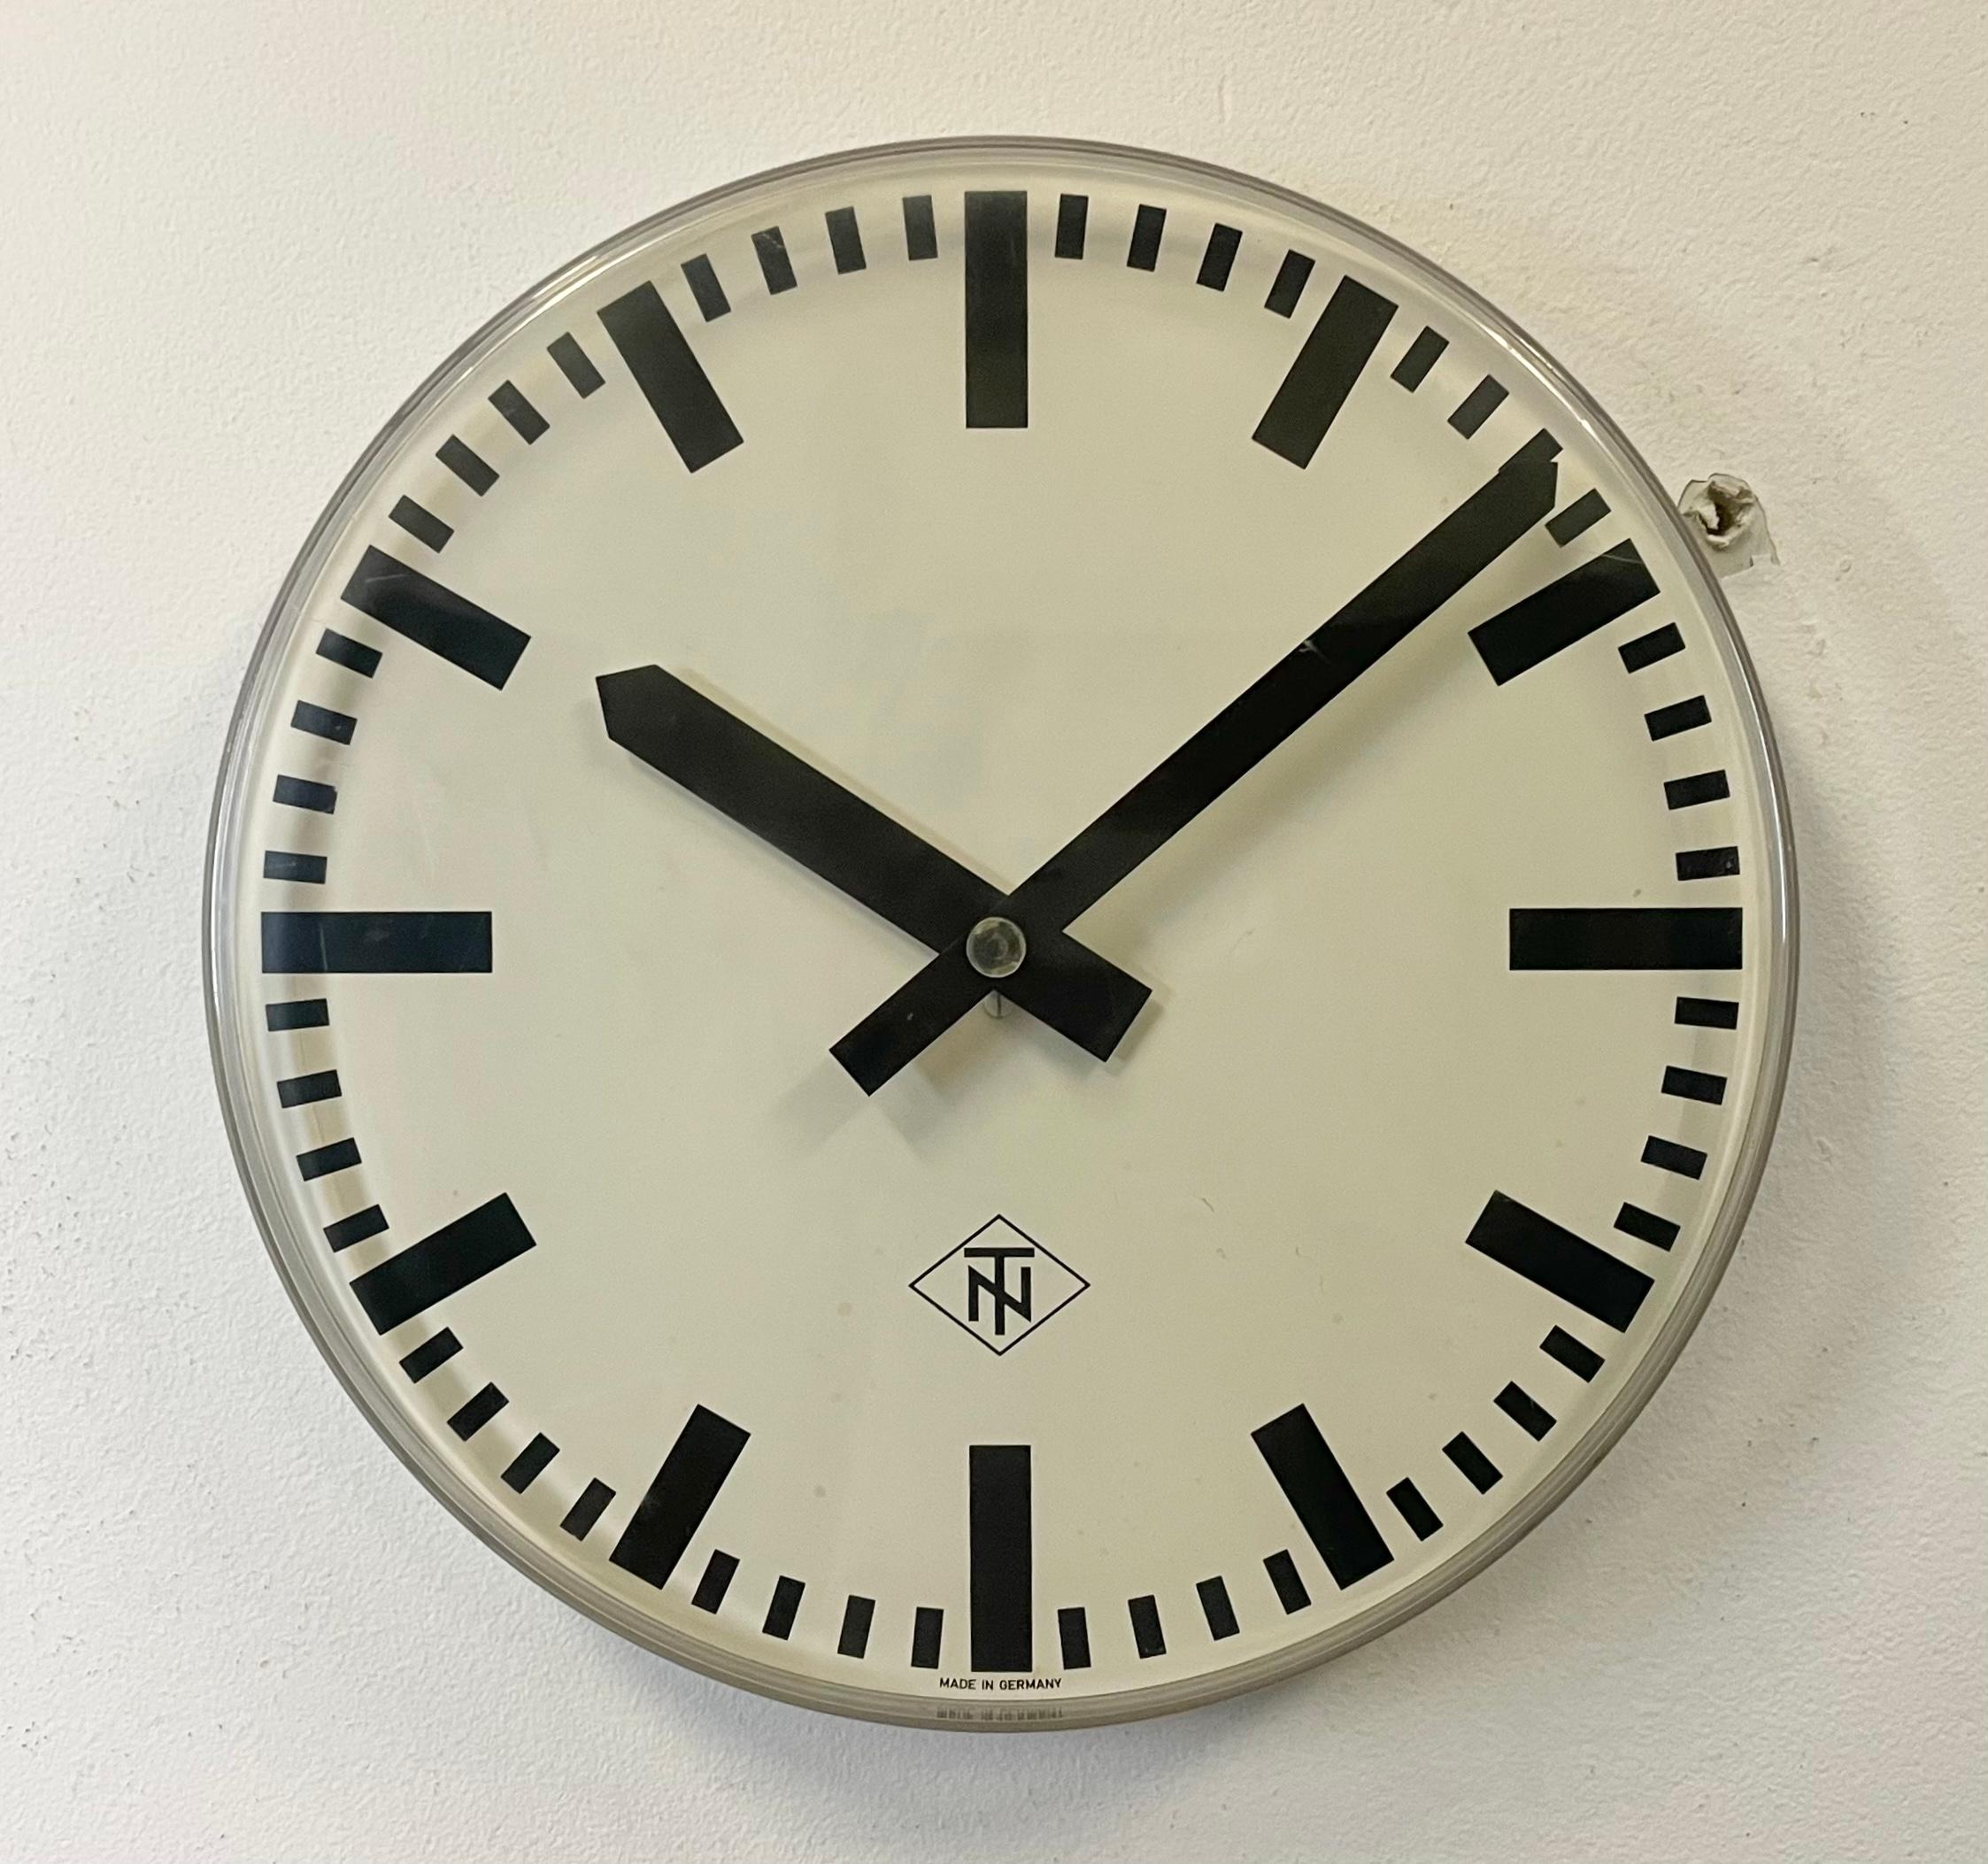 Vintage wall clock produced by TN Telefonbau und Normalzeit in Germany during the 1960s. It features a clear convex plexiglass frame, a white metal dial and black aluminium hands. The piece has been converted into a battery-powered clockwork and